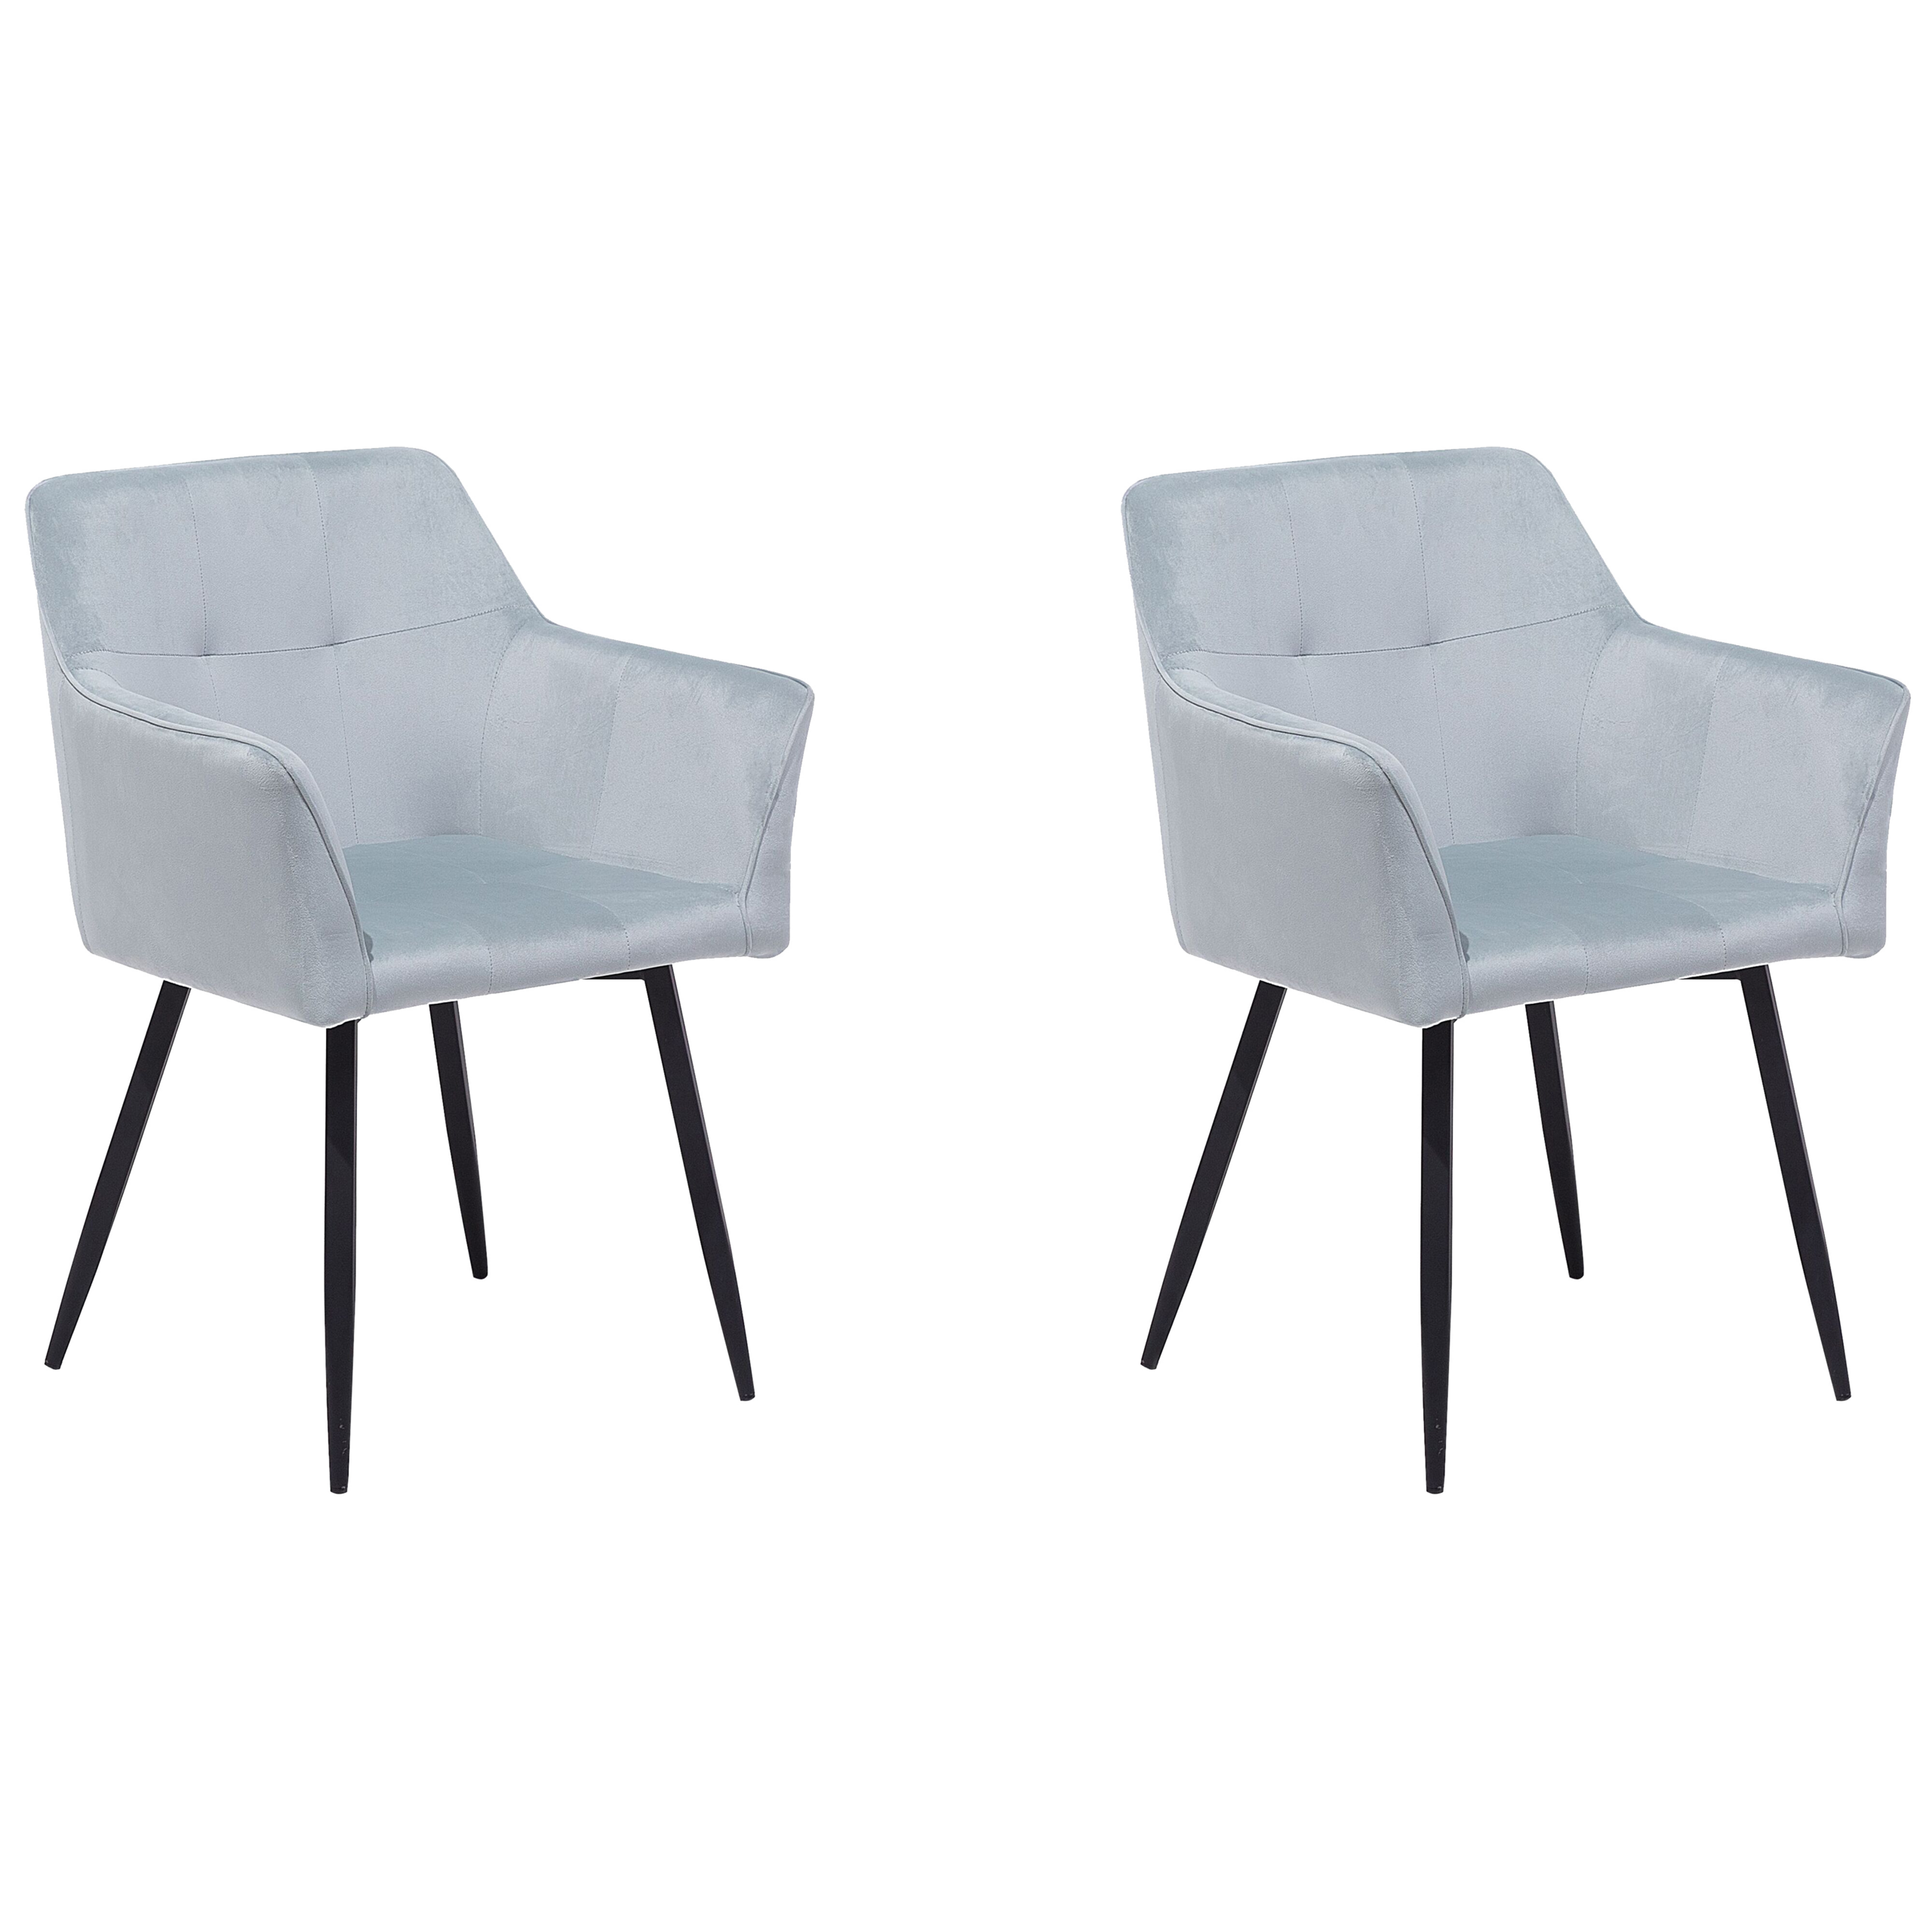 Beliani Set of 2 Dining Chairs Grey Velvet Upholstered Seat with Armrests Black Metal Legs